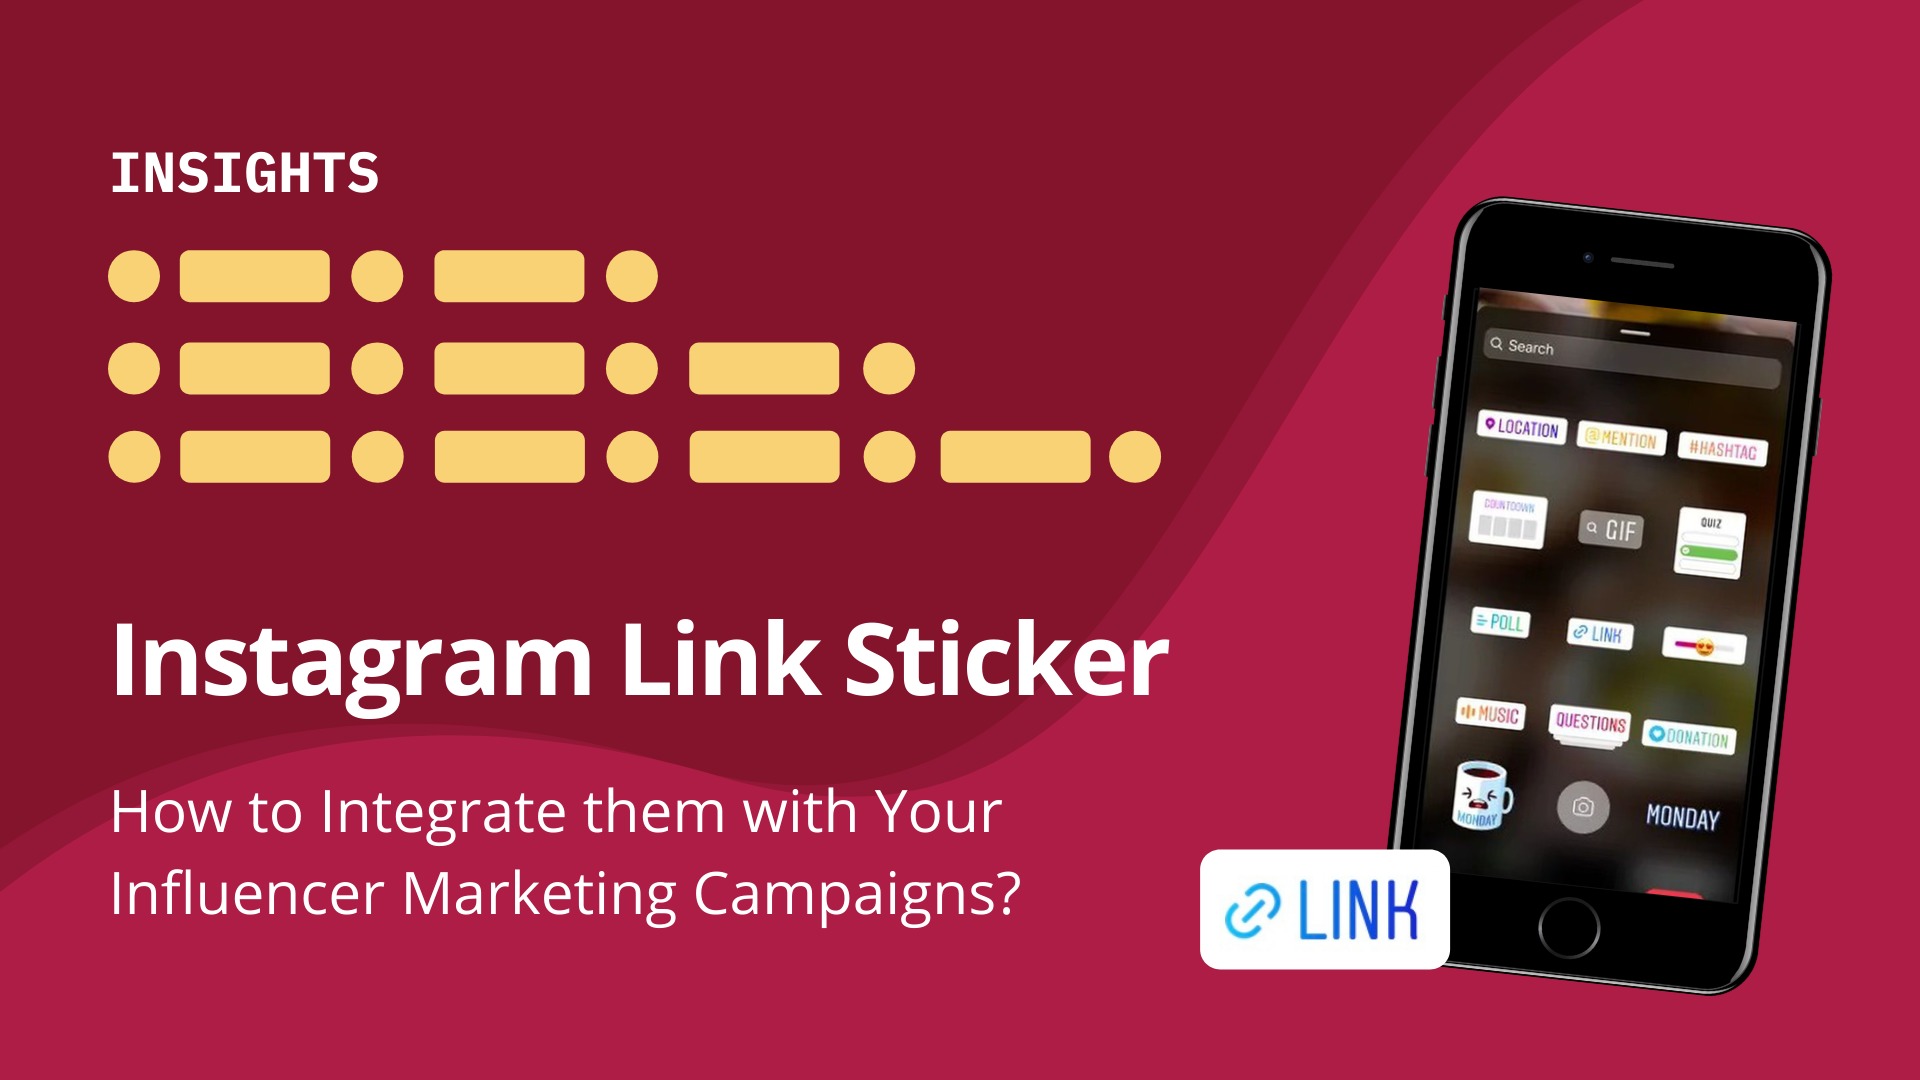 Instagram Link Sticker: How to Integrate them with Your Influencer Marketing Campaigns? - blog by Winkl (An influencer marketing platform)